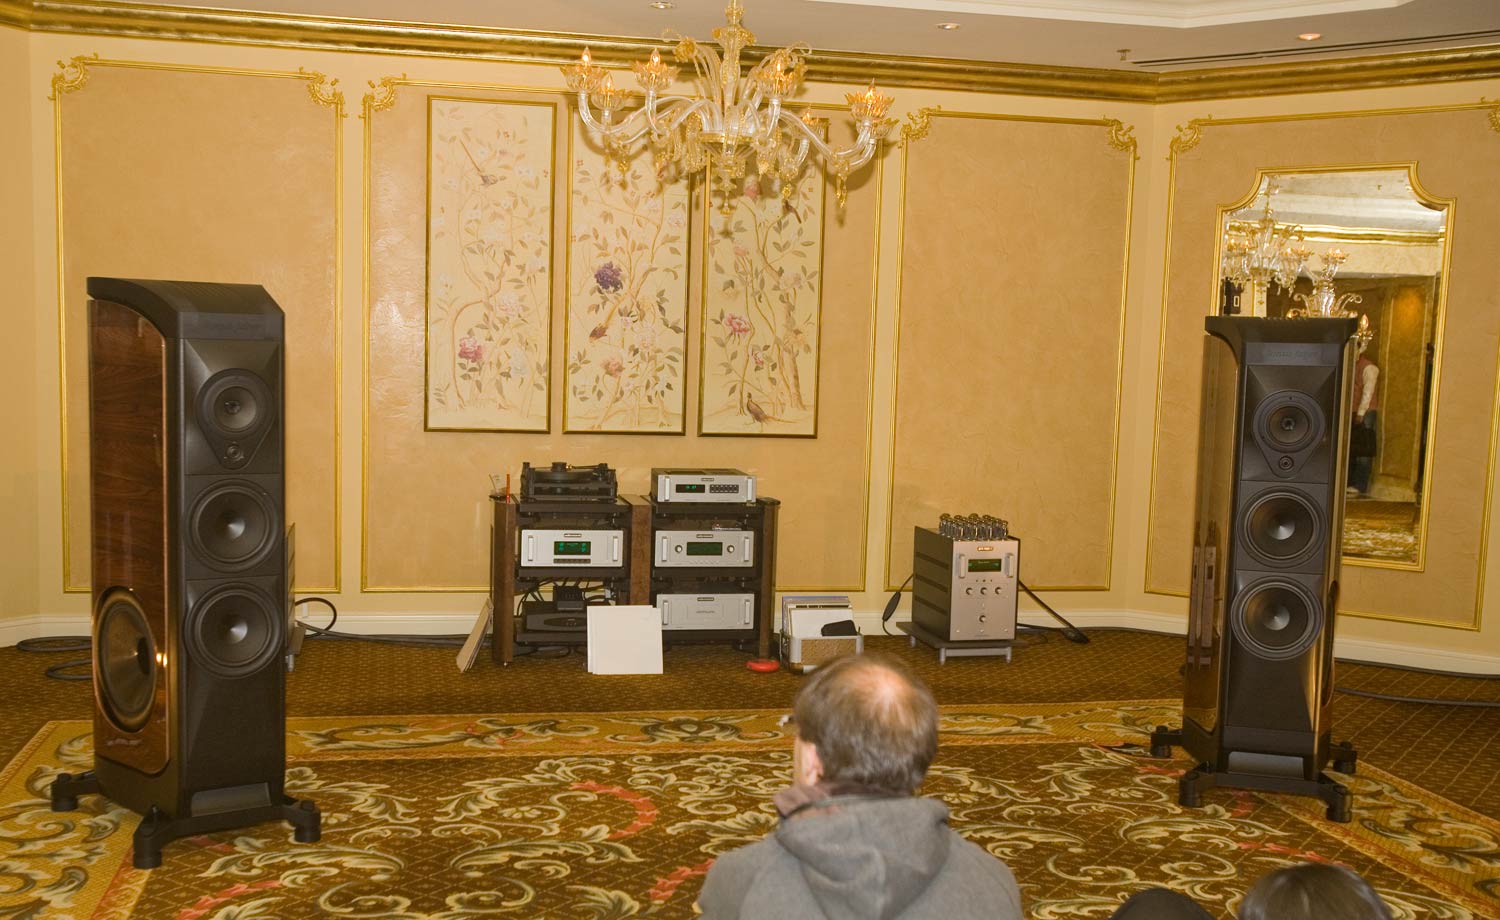 Audio Research, Harmonic Resolution Systems, SME, Sonus Faber